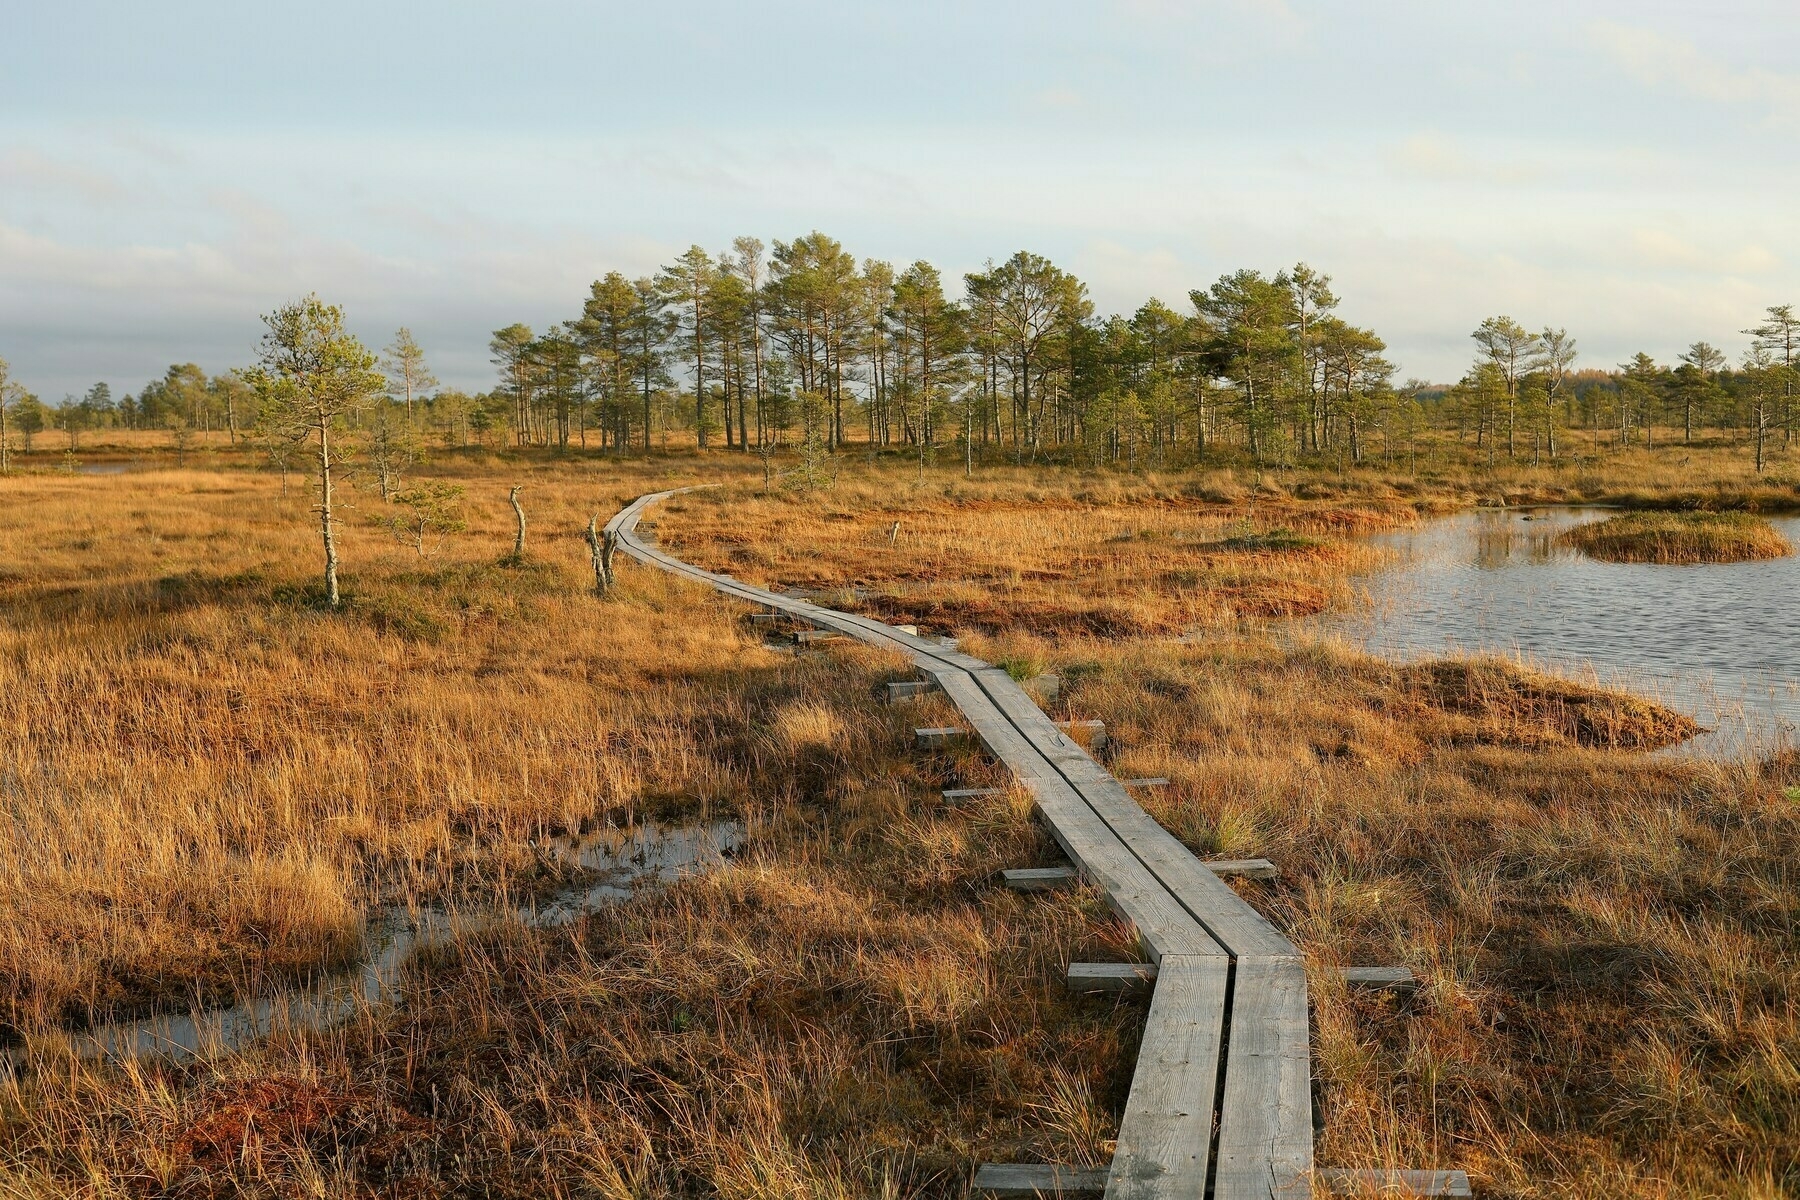 A wooden boardwalk meanders through a wetland with tall grasses, sporadic small trees, and patches of open water. The landscape is bathed in warm sunlight, suggesting early morning or late afternoon. In the background, a denser group of trees is visible against a partly cloudy sky.